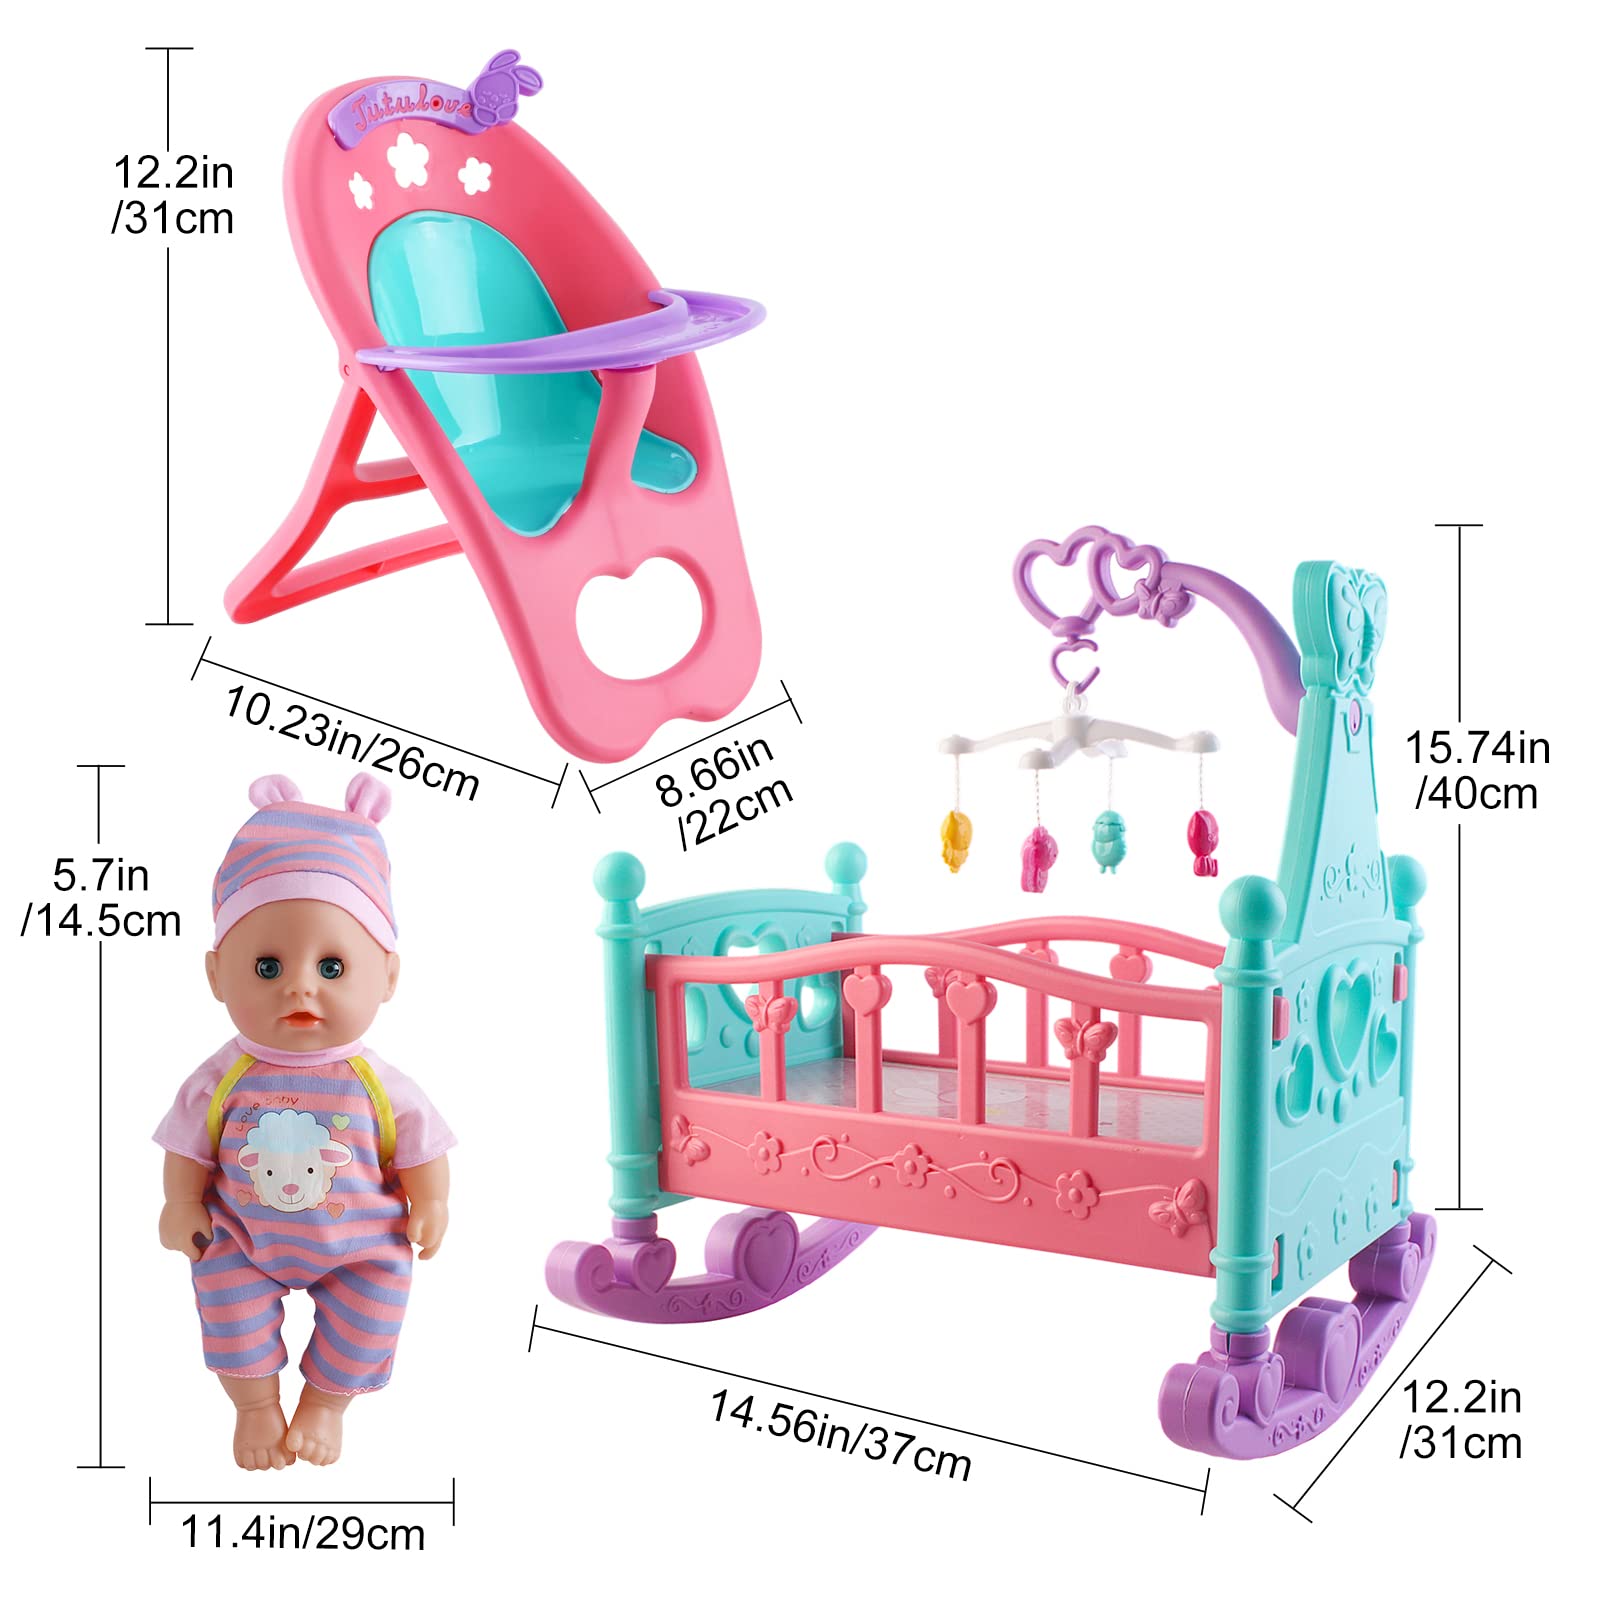 deAO Baby Doll Set with Crib Mobile High Chair Stroller Feeding Accessories 21 Pieces Play Set (Baby Doll Included)